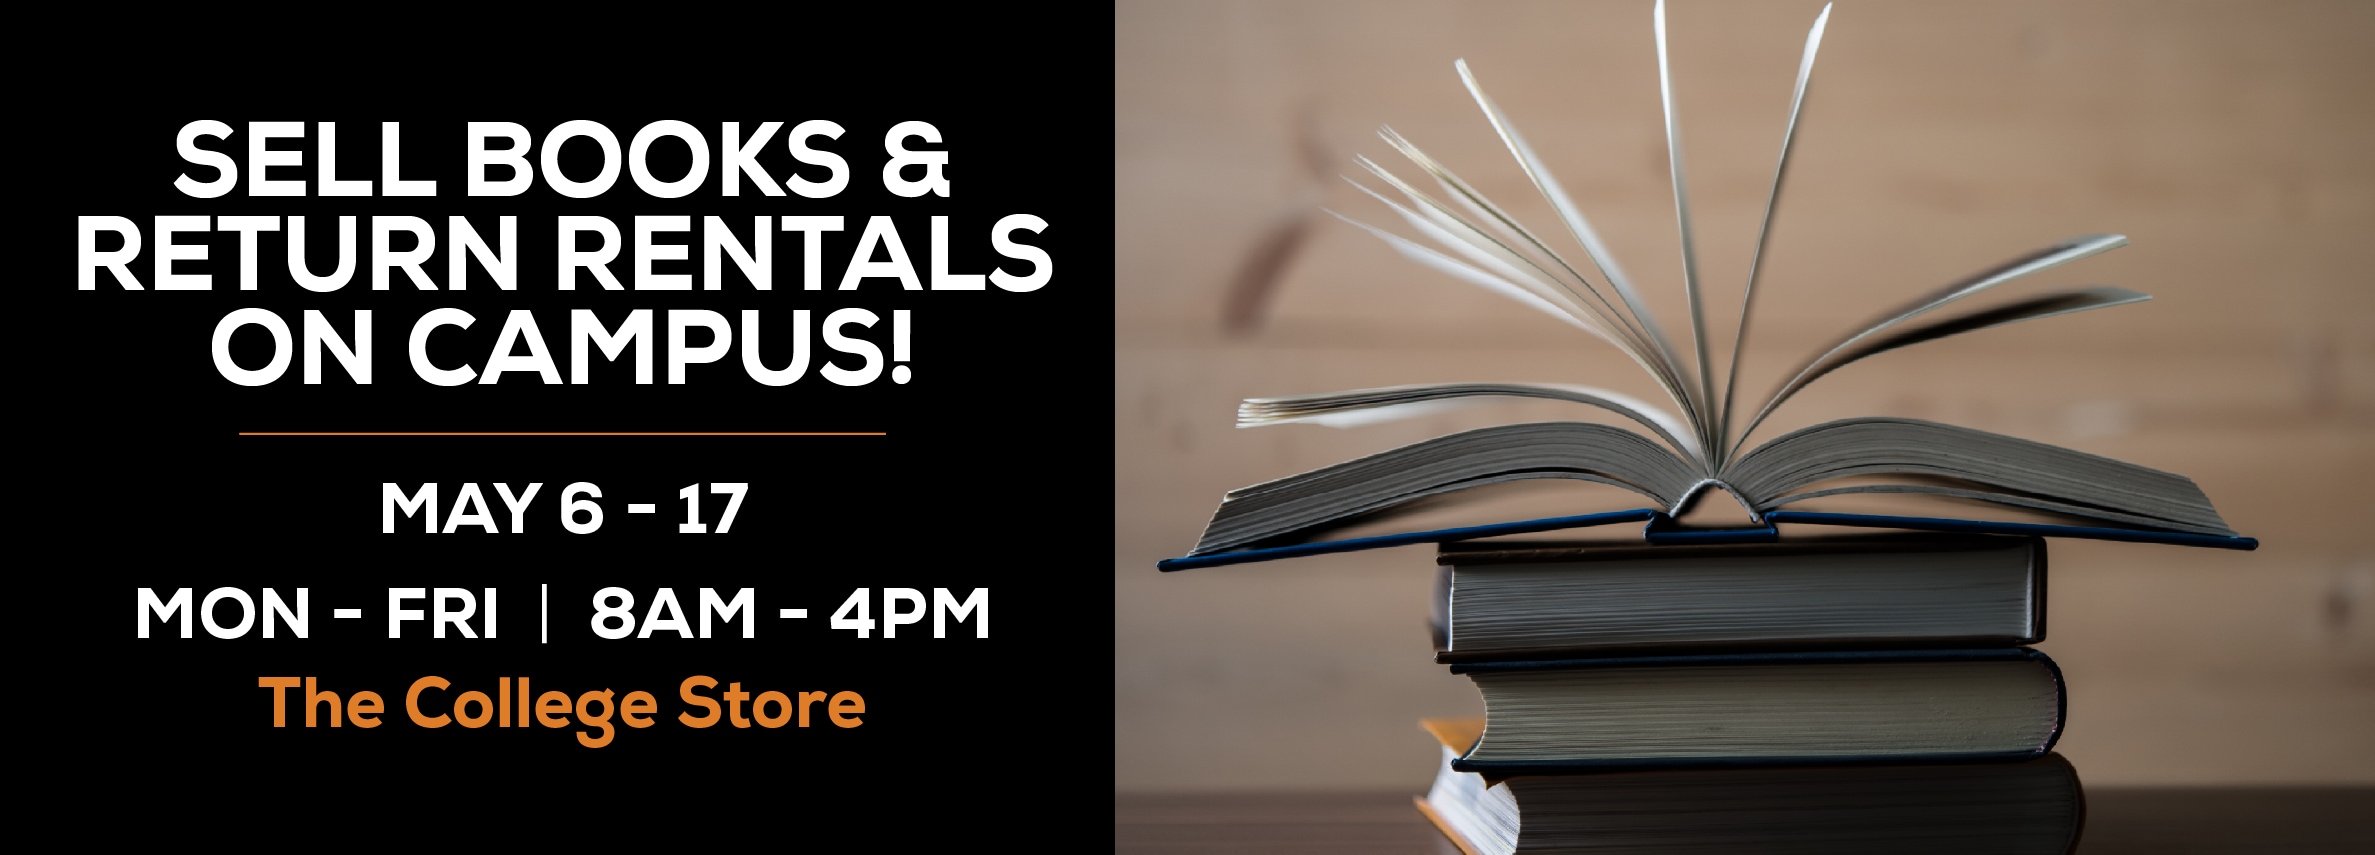 Sell books and return rentals on campus! May 6 - 17. Monday through Friday, 8am to 4pm at The College Store.